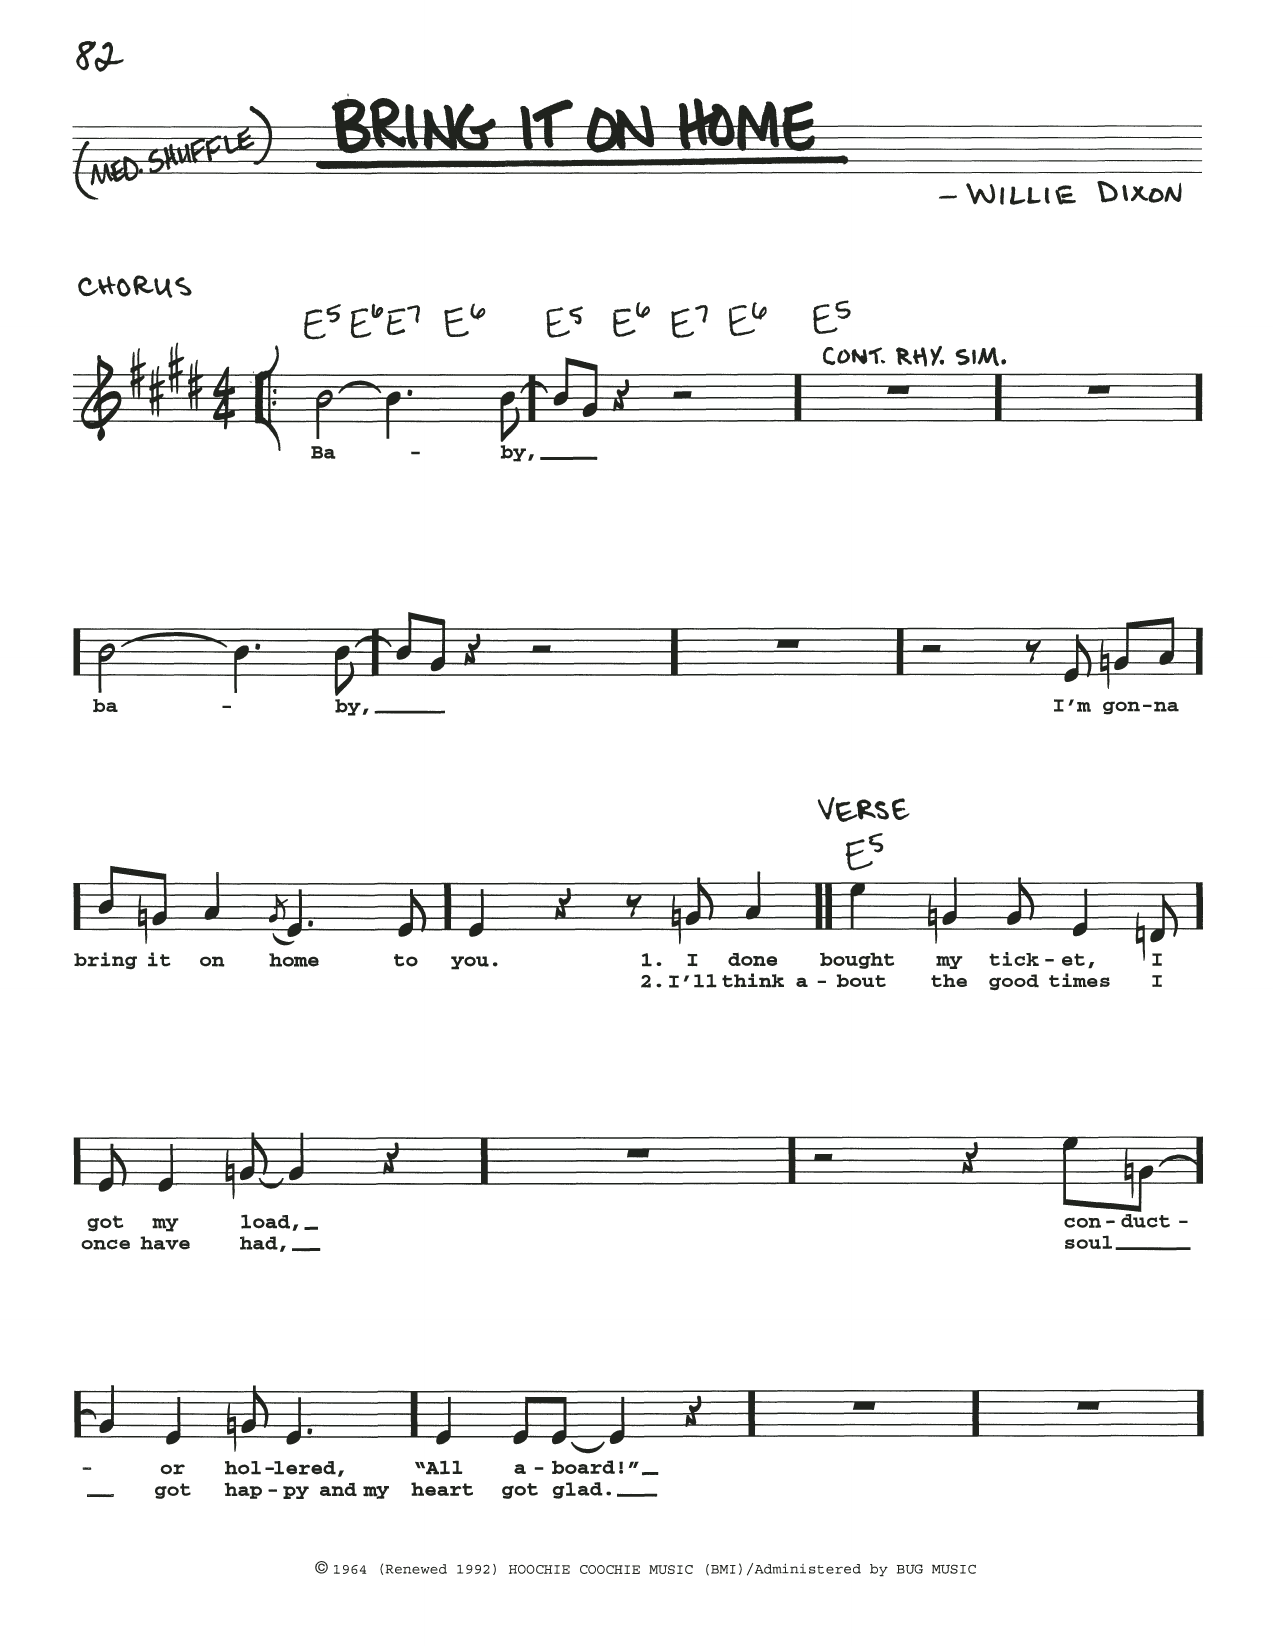 Download Sonny Boy Williamson Bring It On Home Sheet Music